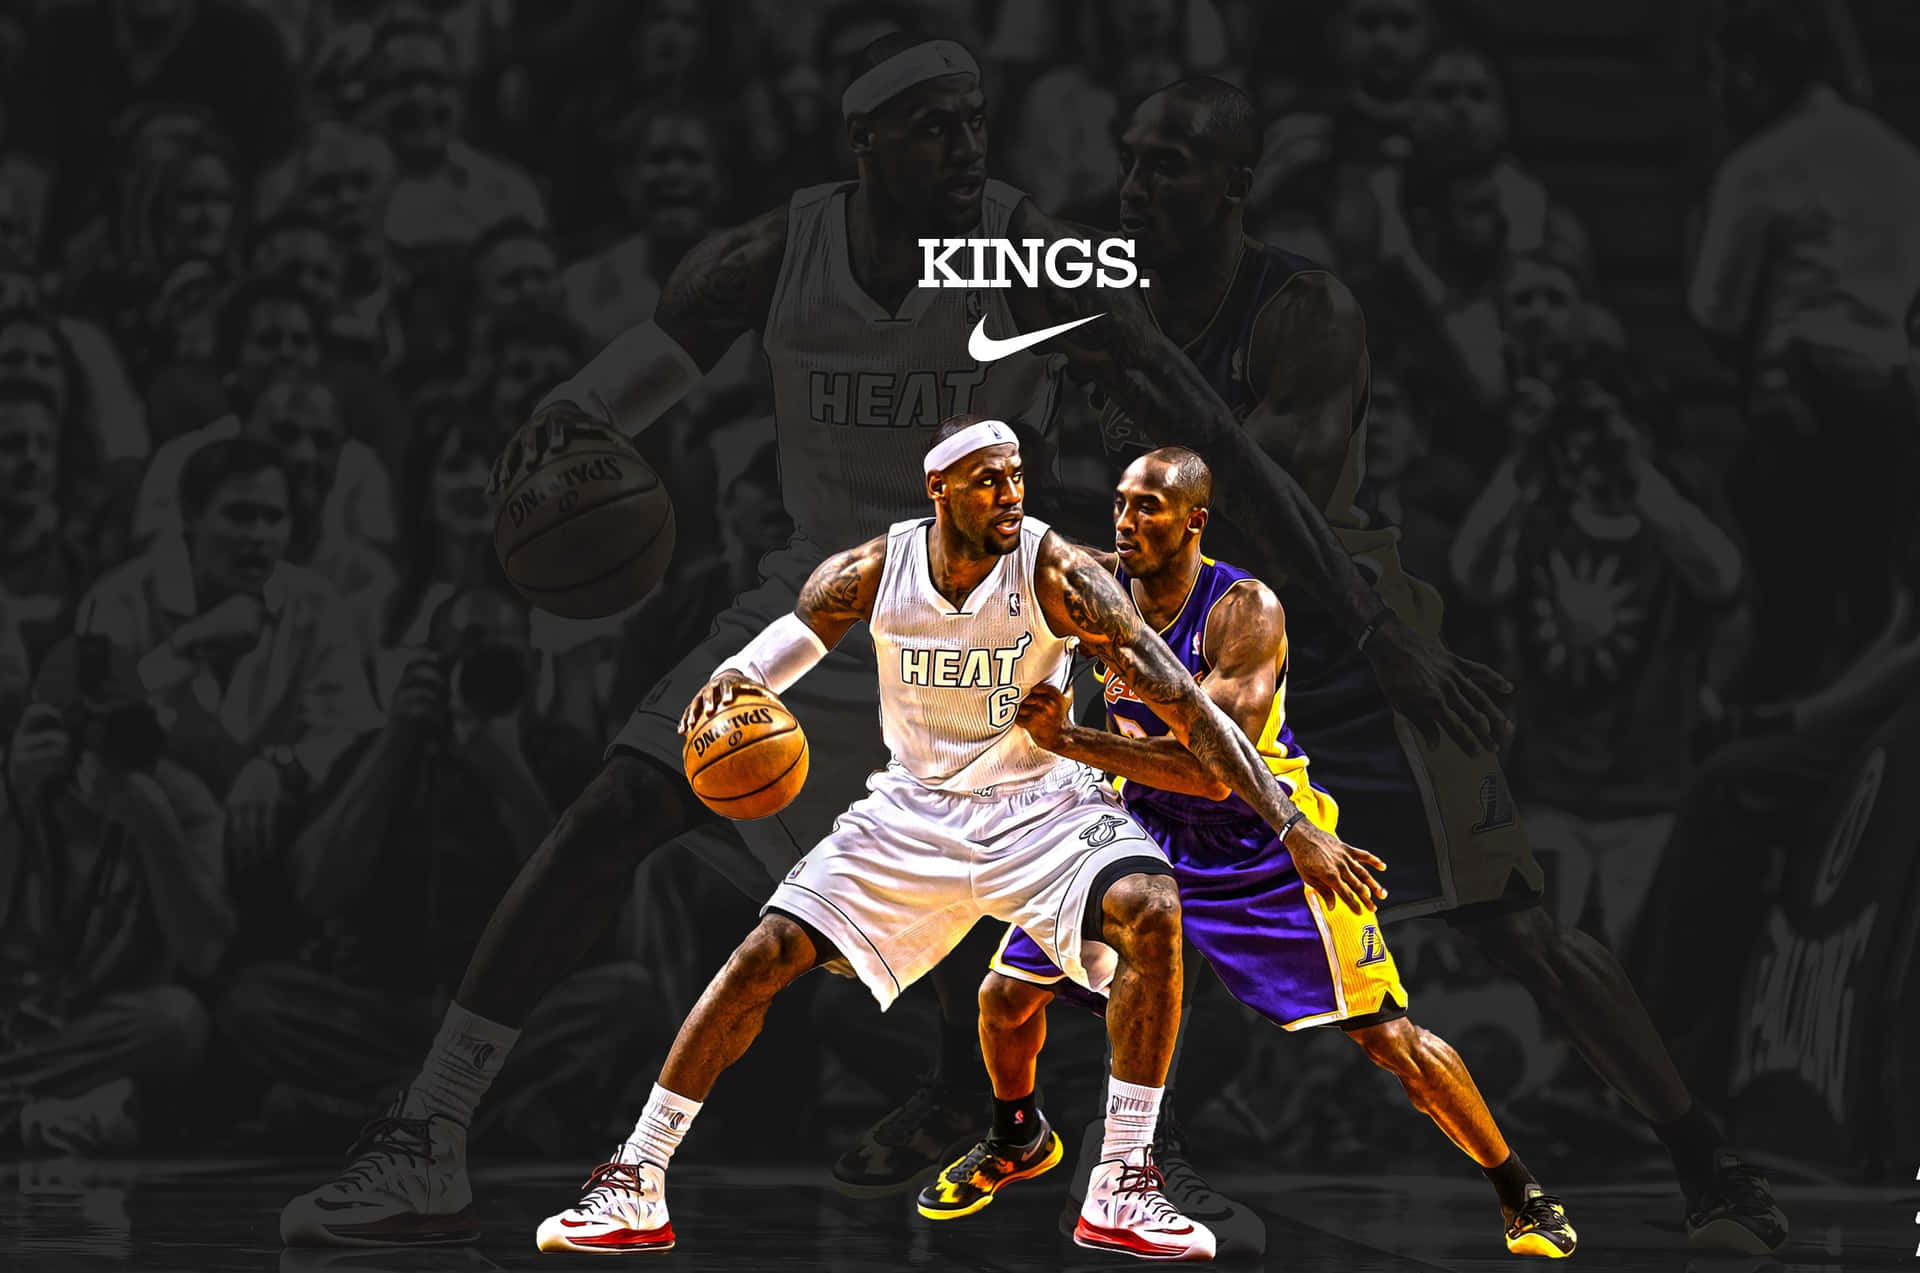 Competing Lebron And Kobe Bryant Poster Wallpaper